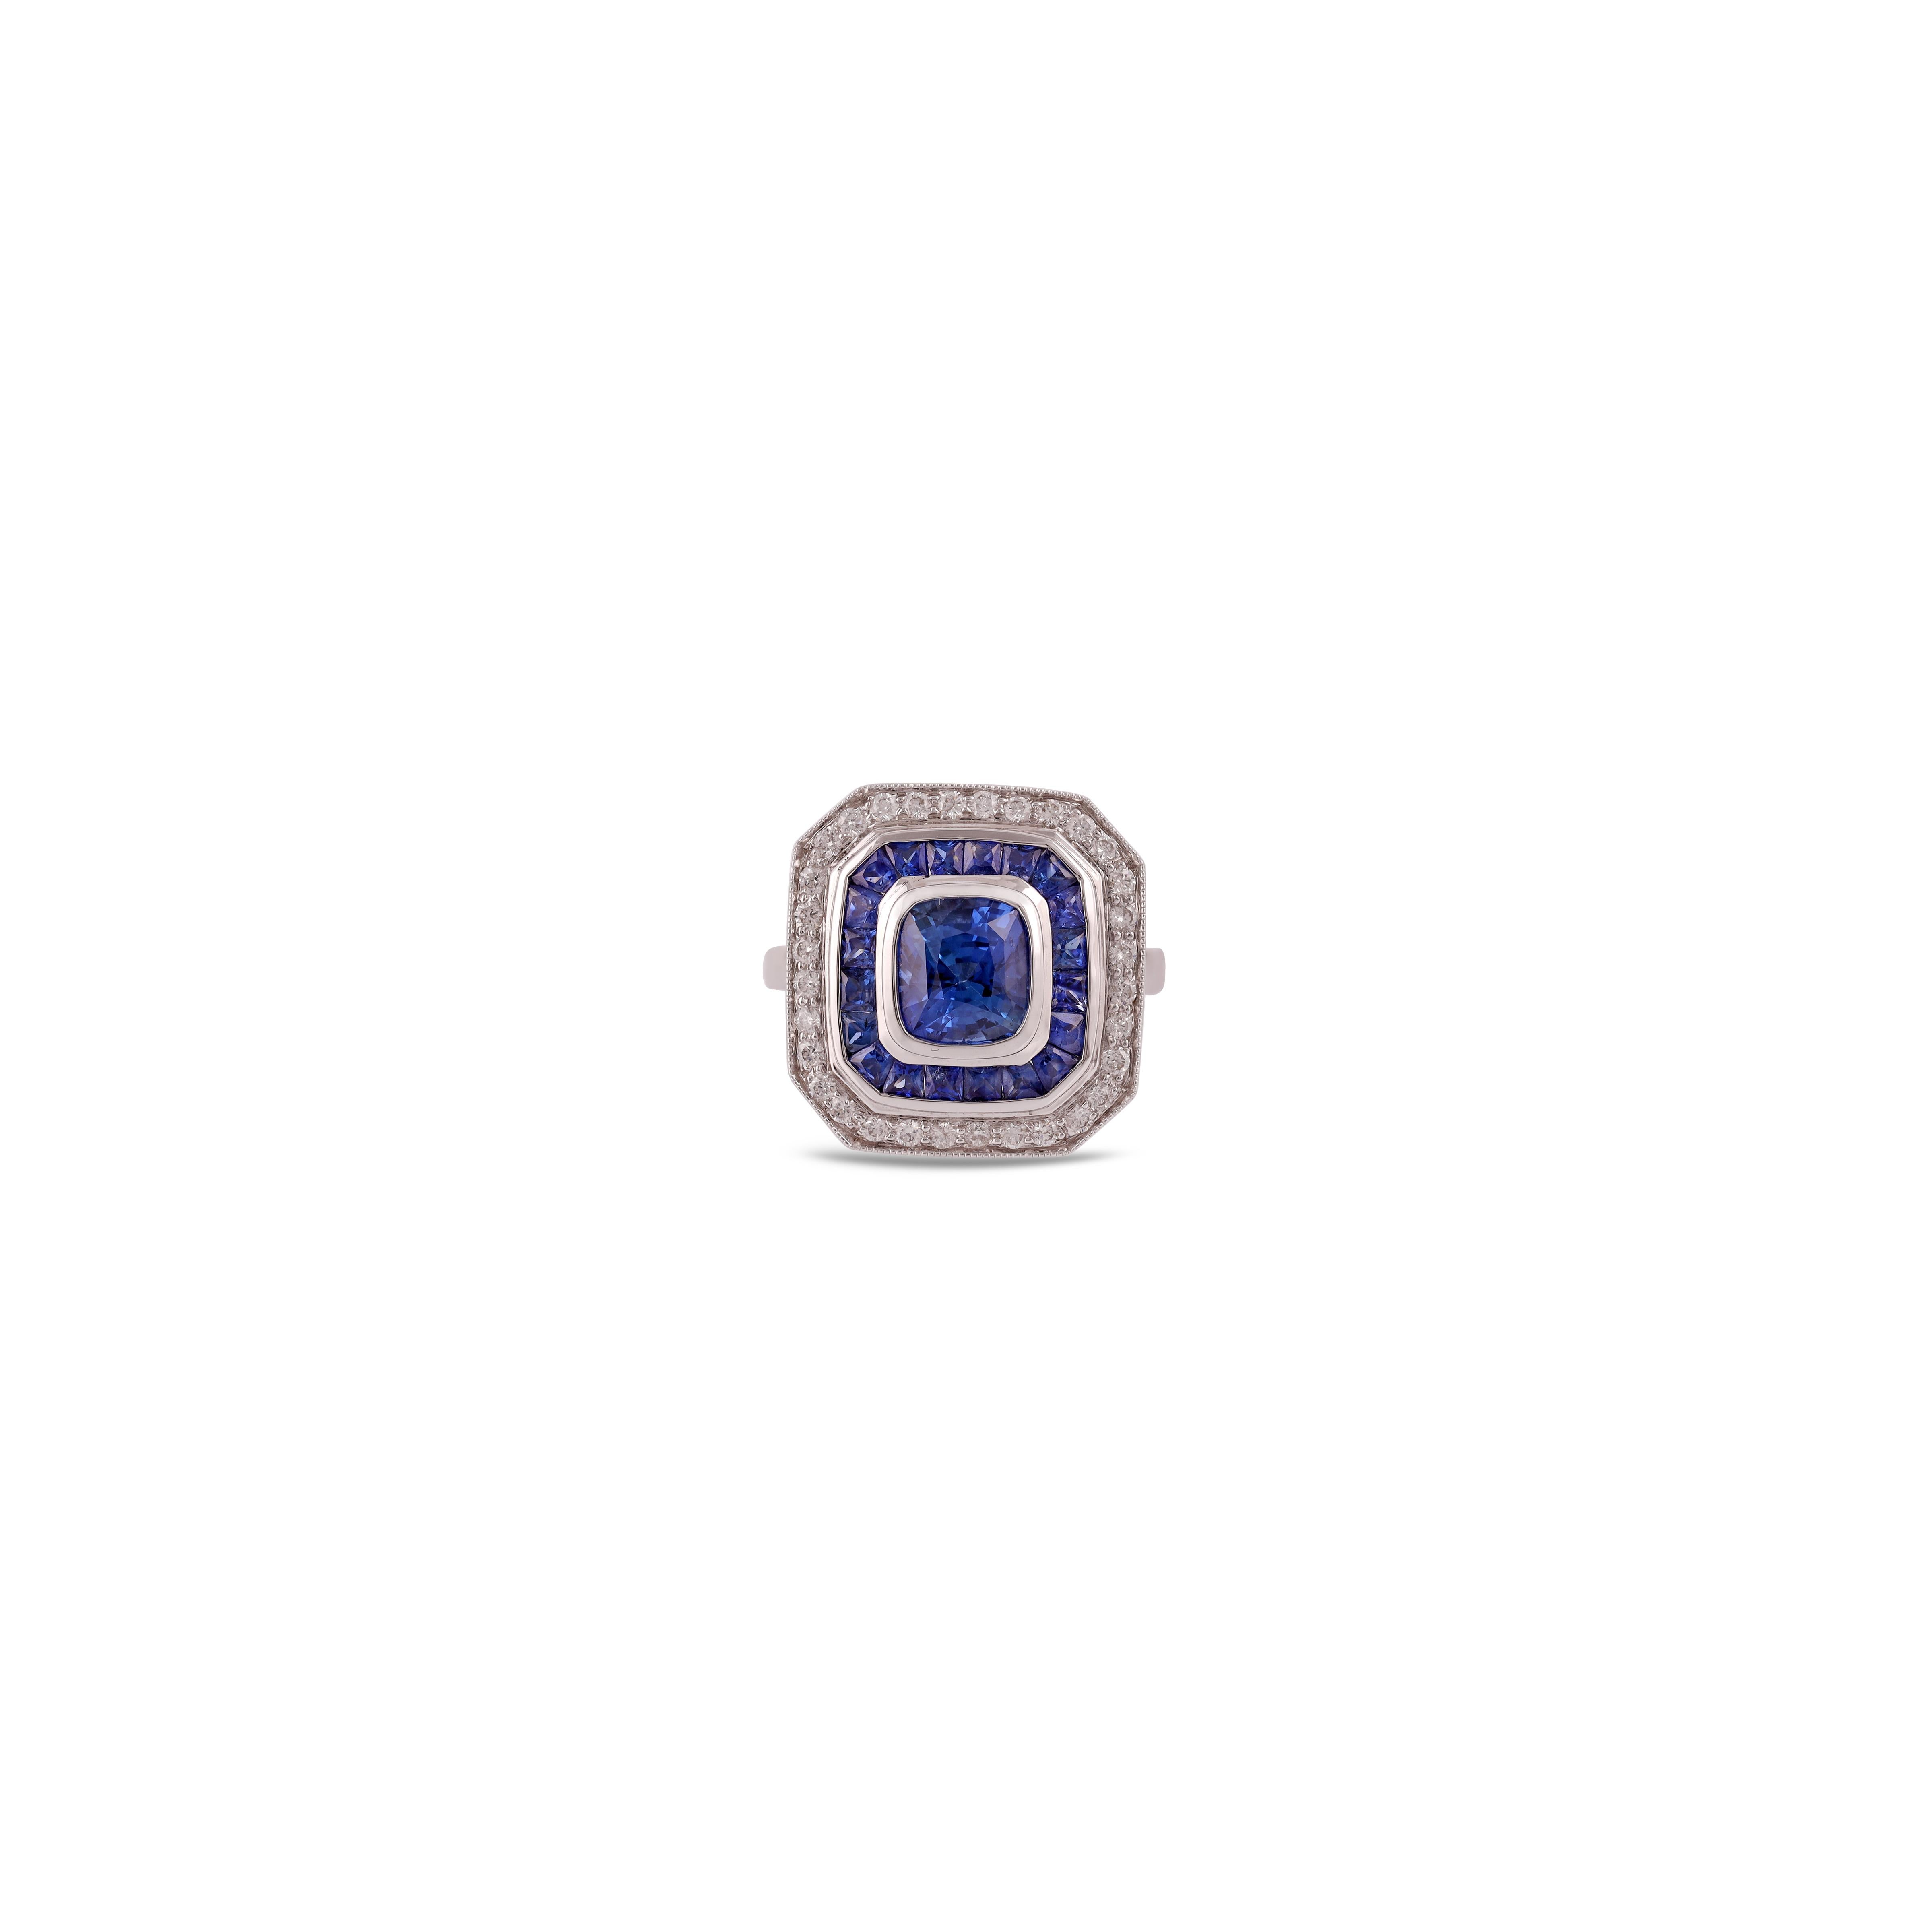 Sapphire = 3.5 Carat
Diamonds = 0.75 Carats
Metal: 18K Gold
Ring Size: 7.5* US
*It can be resized complimentary
